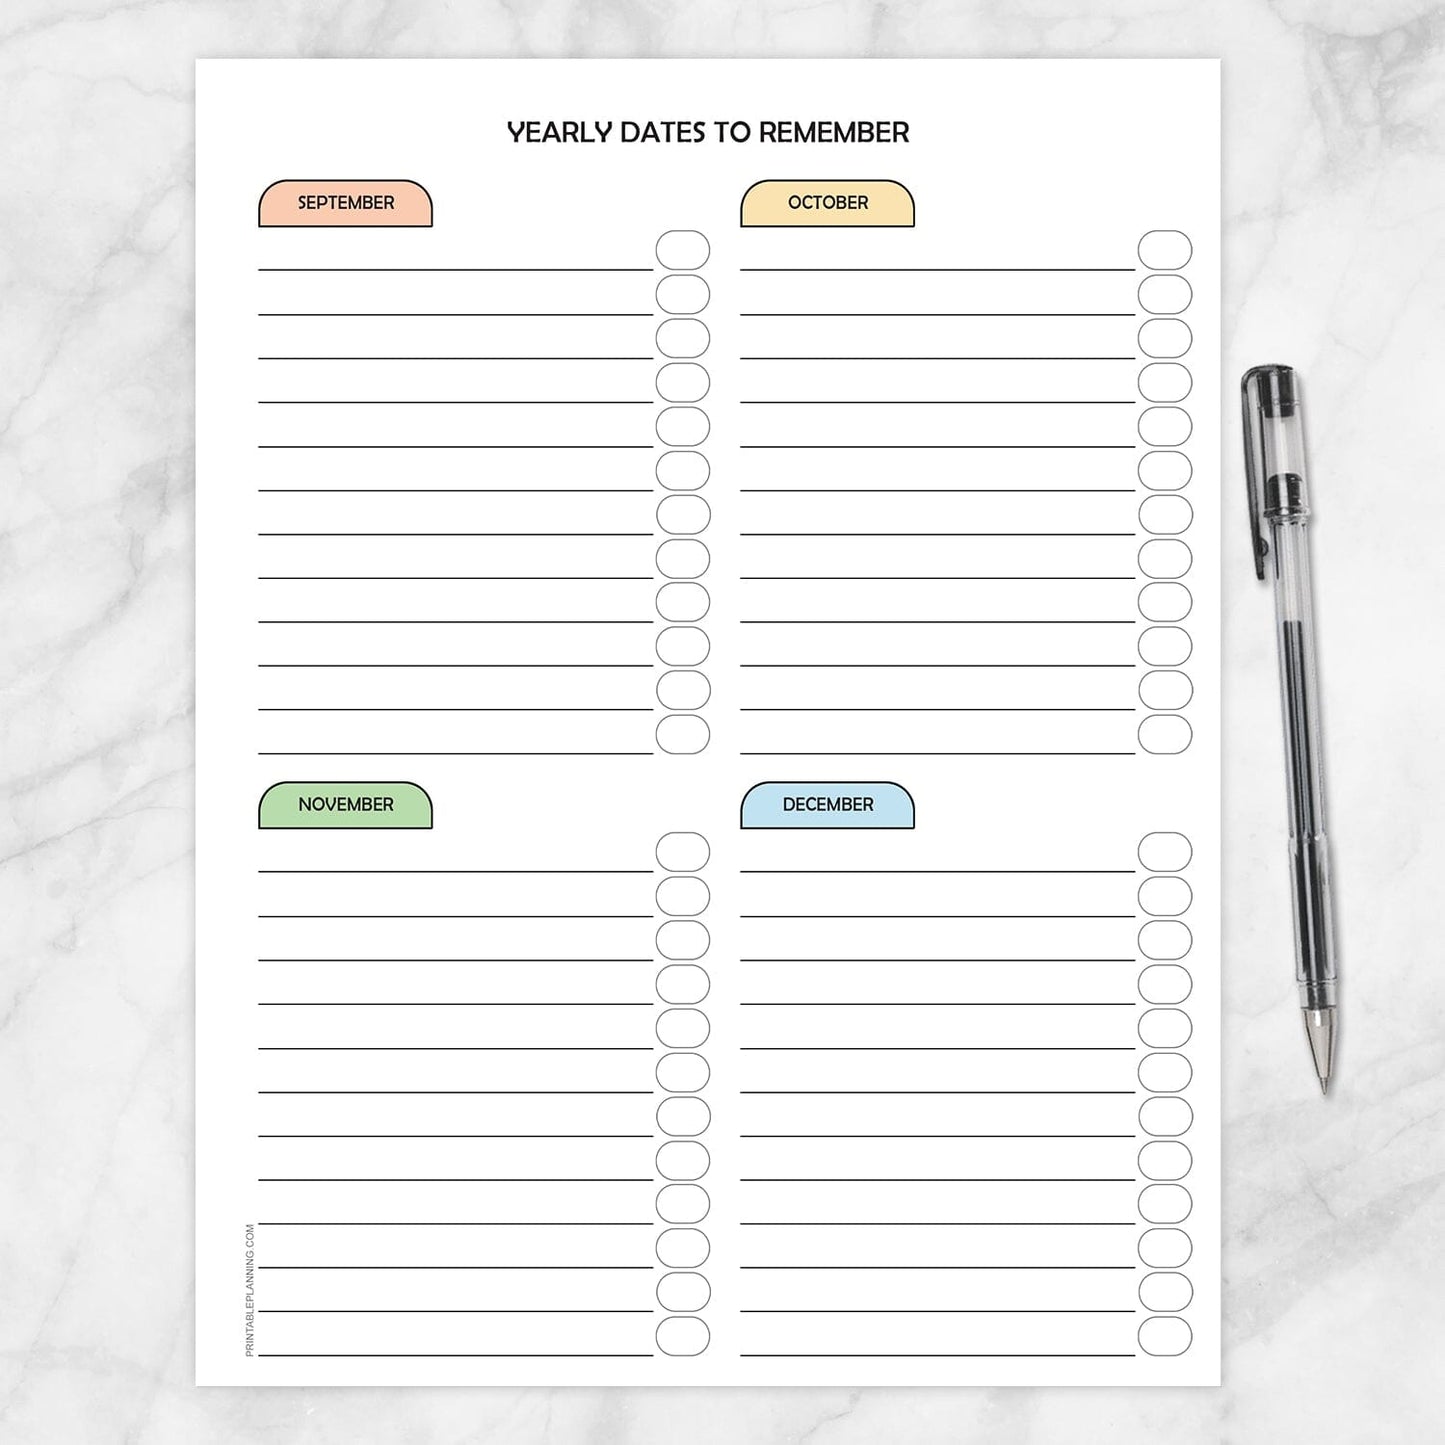 Printable Yearly Dates to Remember (page 3 of 3) at Printable Planning.